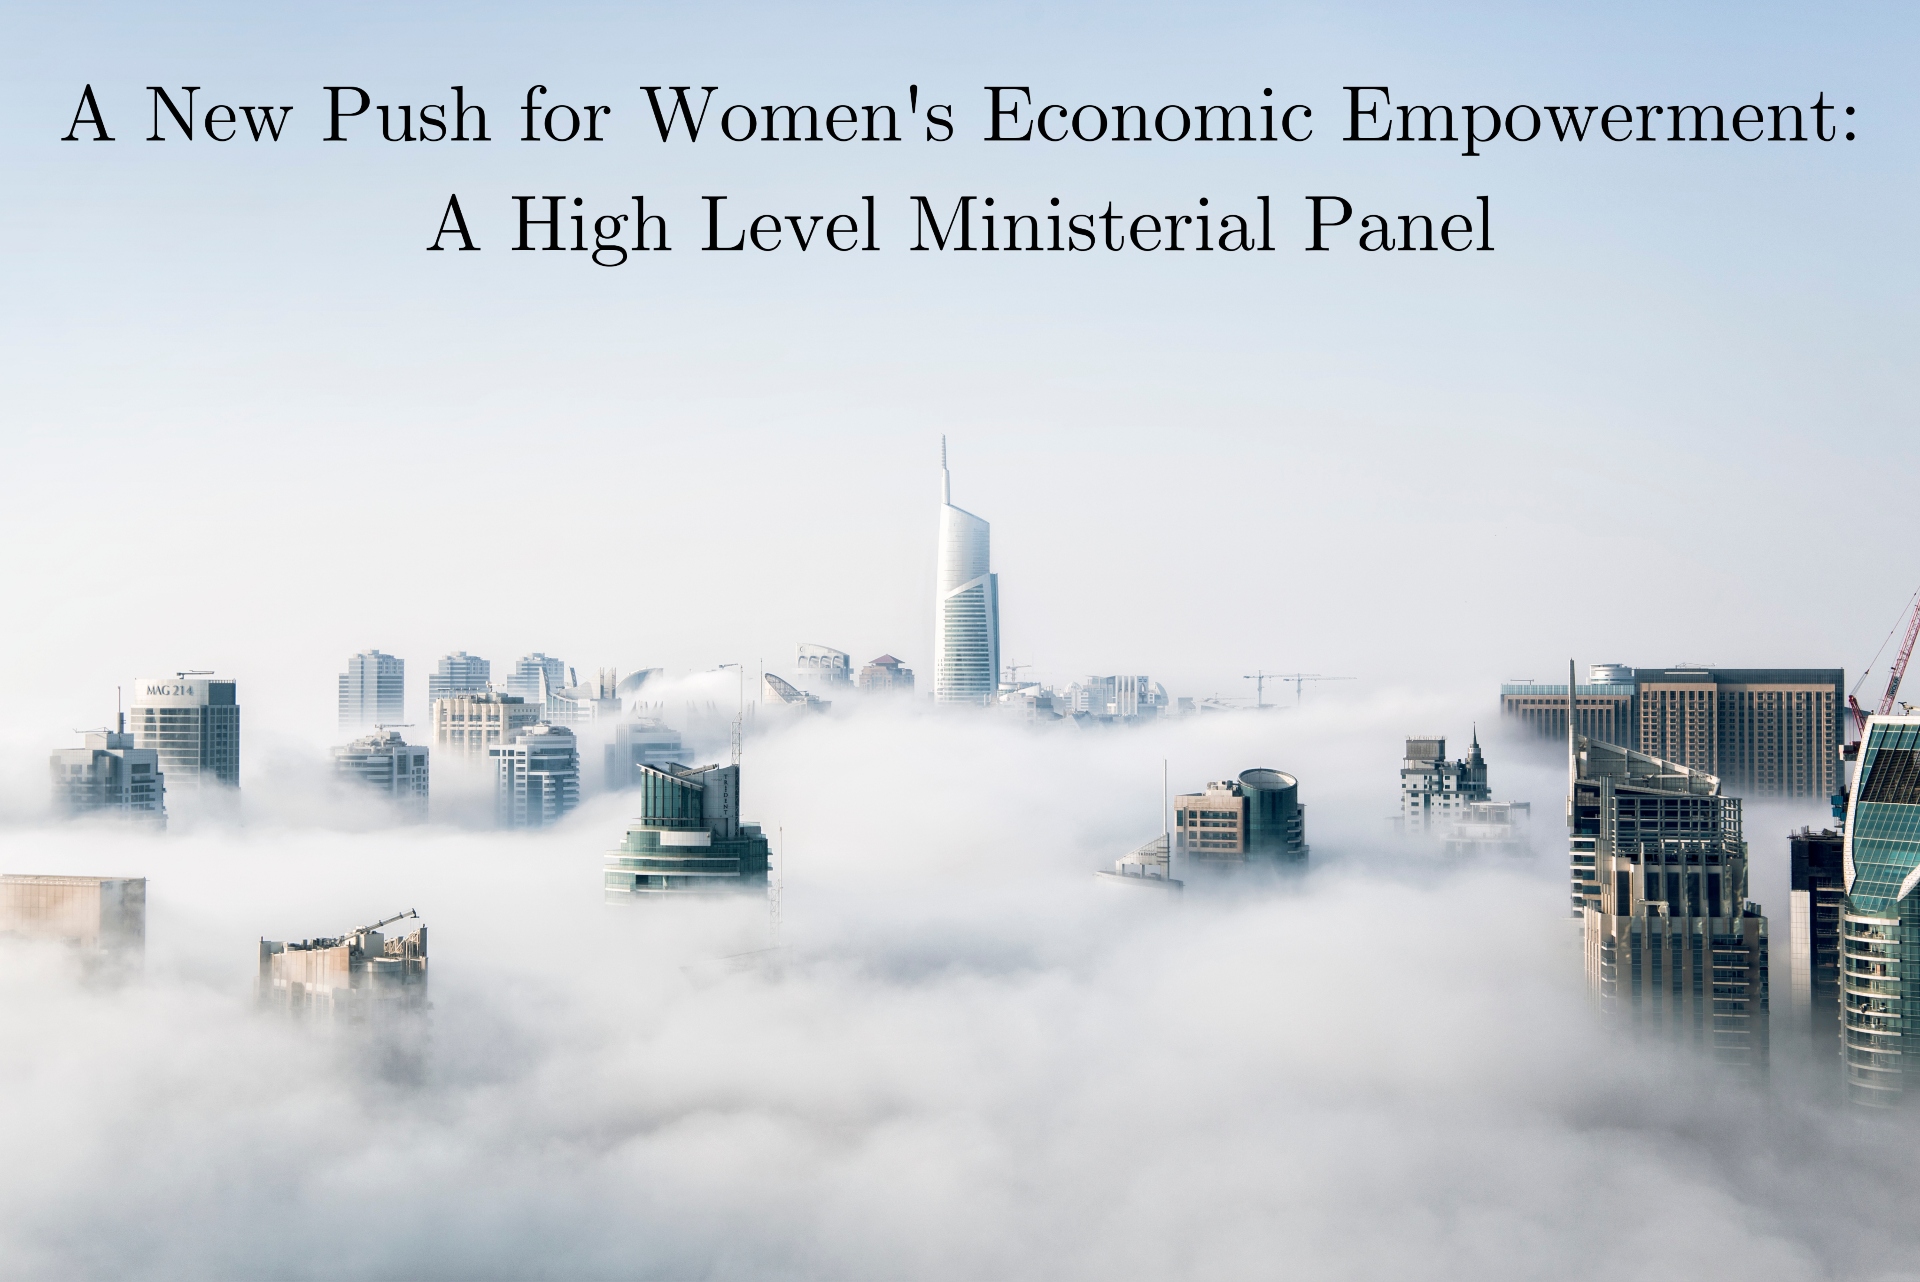 A New Push on Women’s Economic Empowerment: A High-level Ministerial Panel